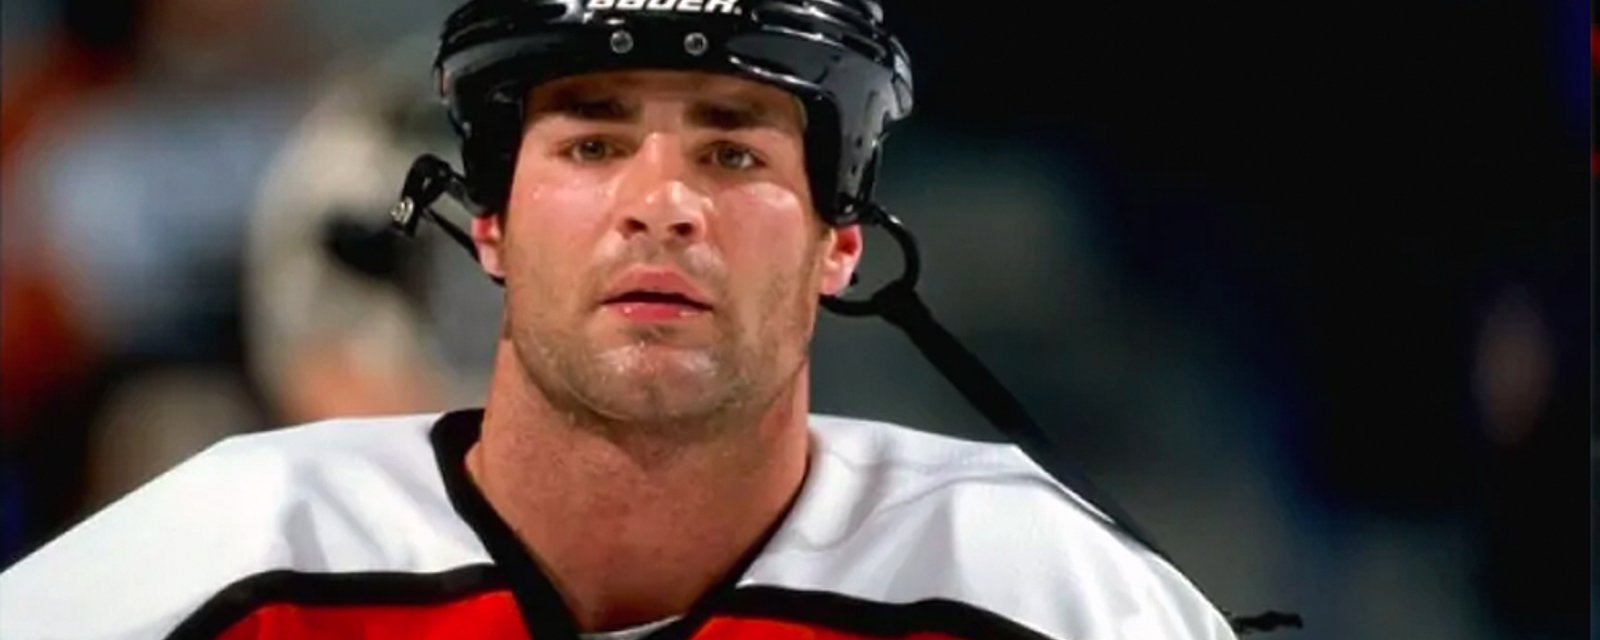 Lindros owns the Penguins and scores a goal without a stick